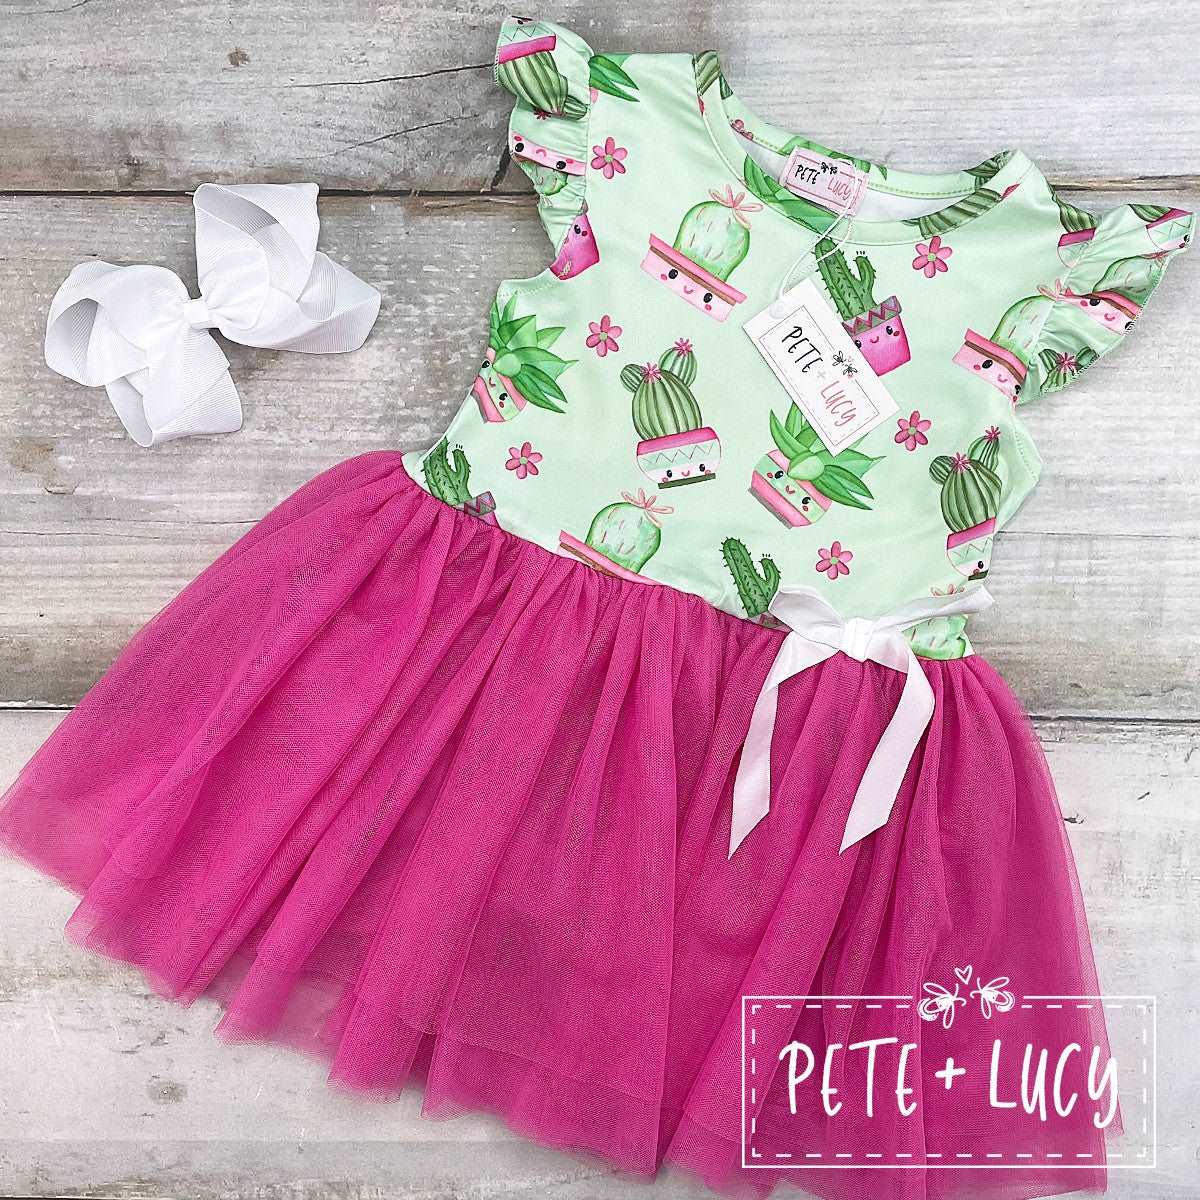 Sweet succulents dress 6-12mo Baby in Styles